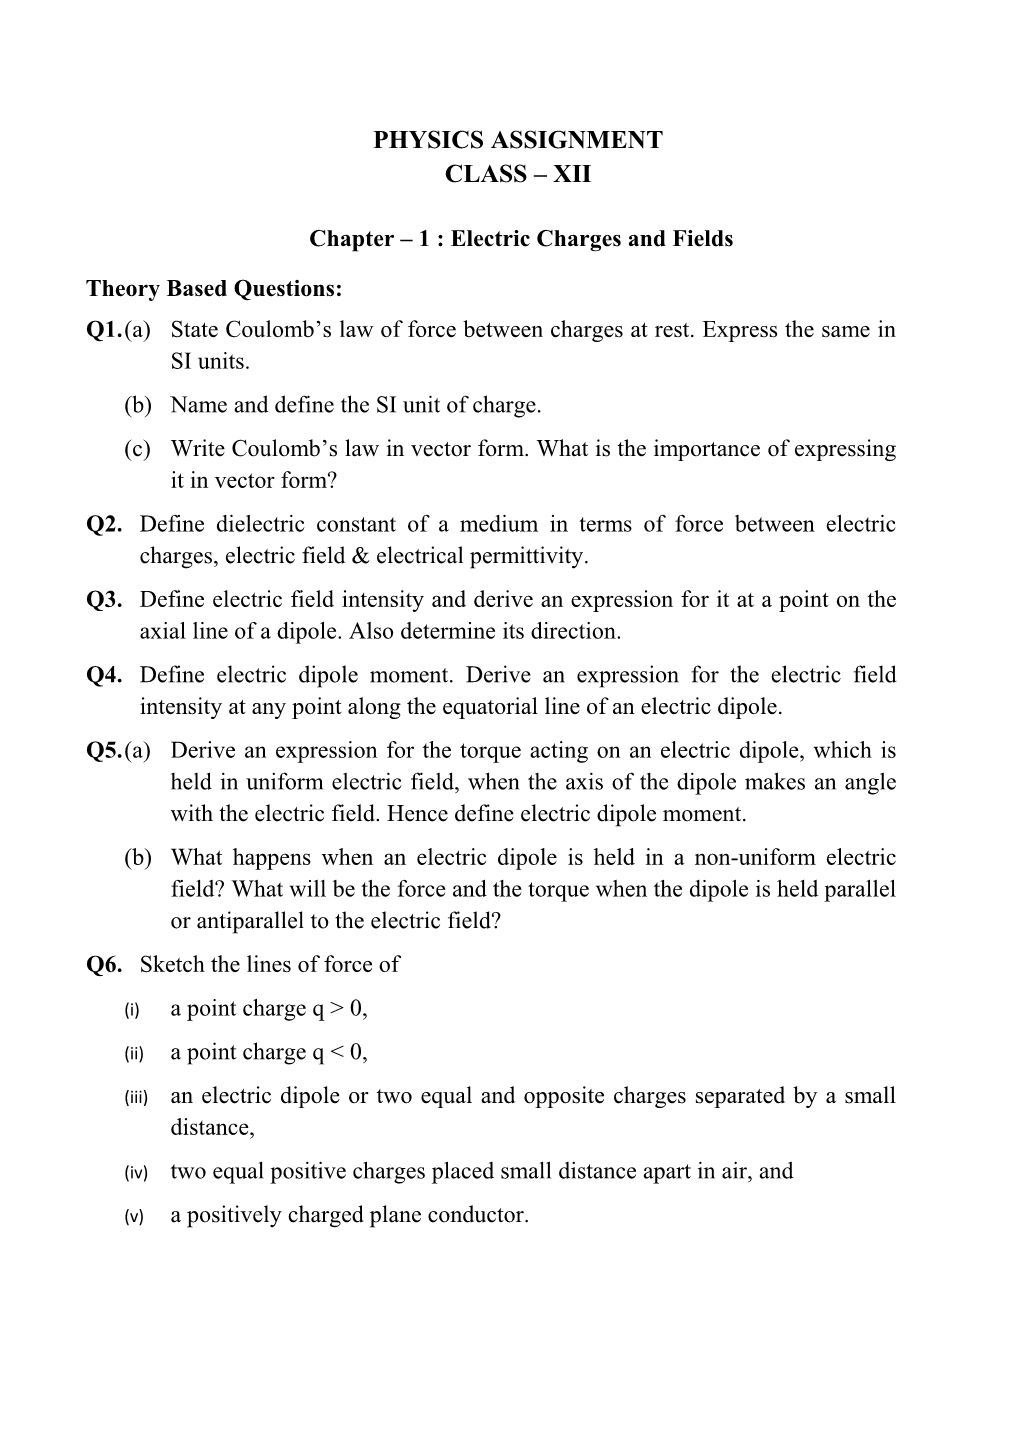 Chapter 1 : Electric Charges and Fields